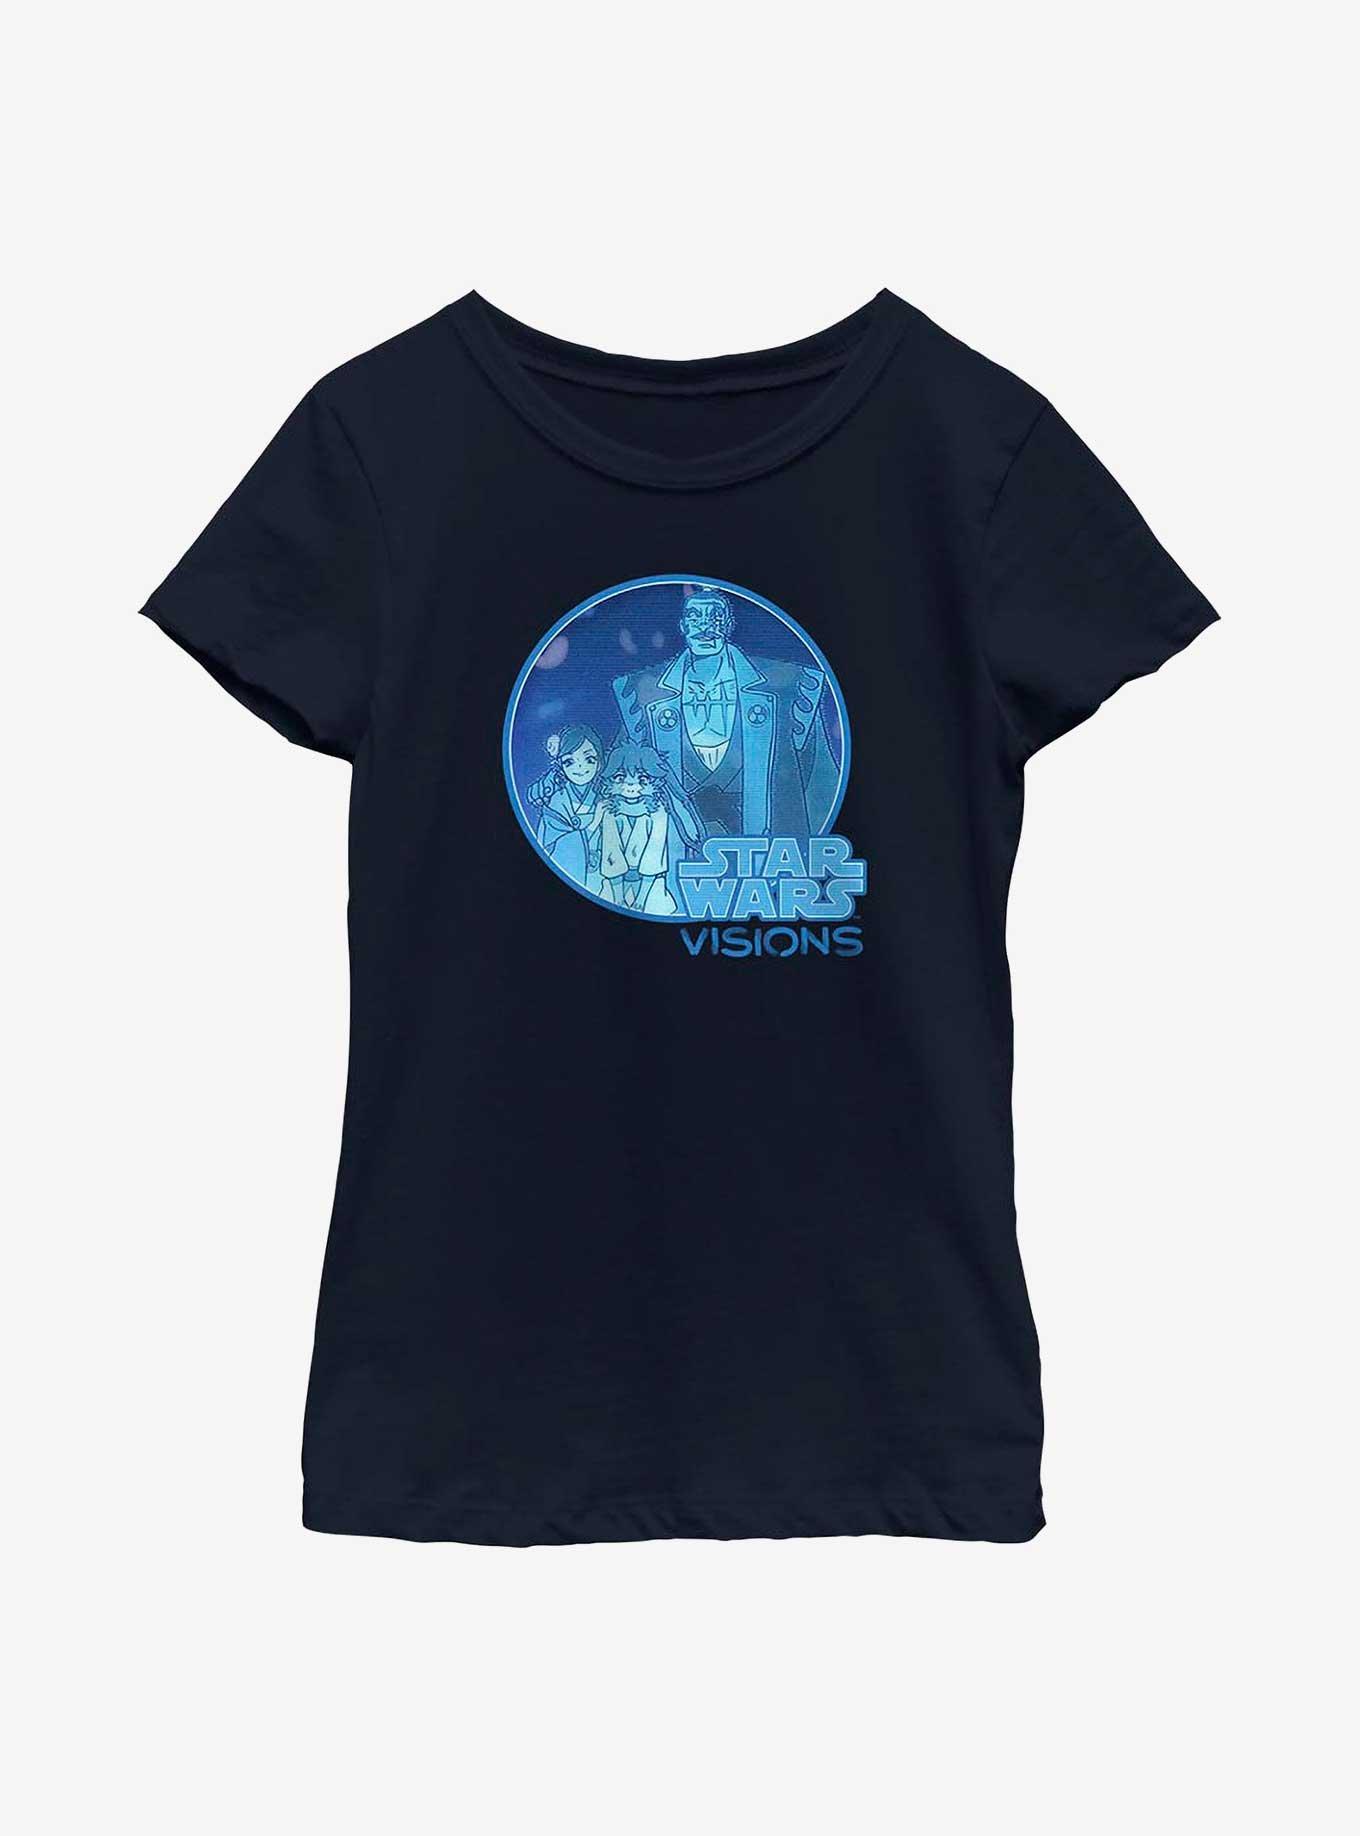 Star Wars: Visions Once A Family Youth Girls T-Shirt, NAVY, hi-res